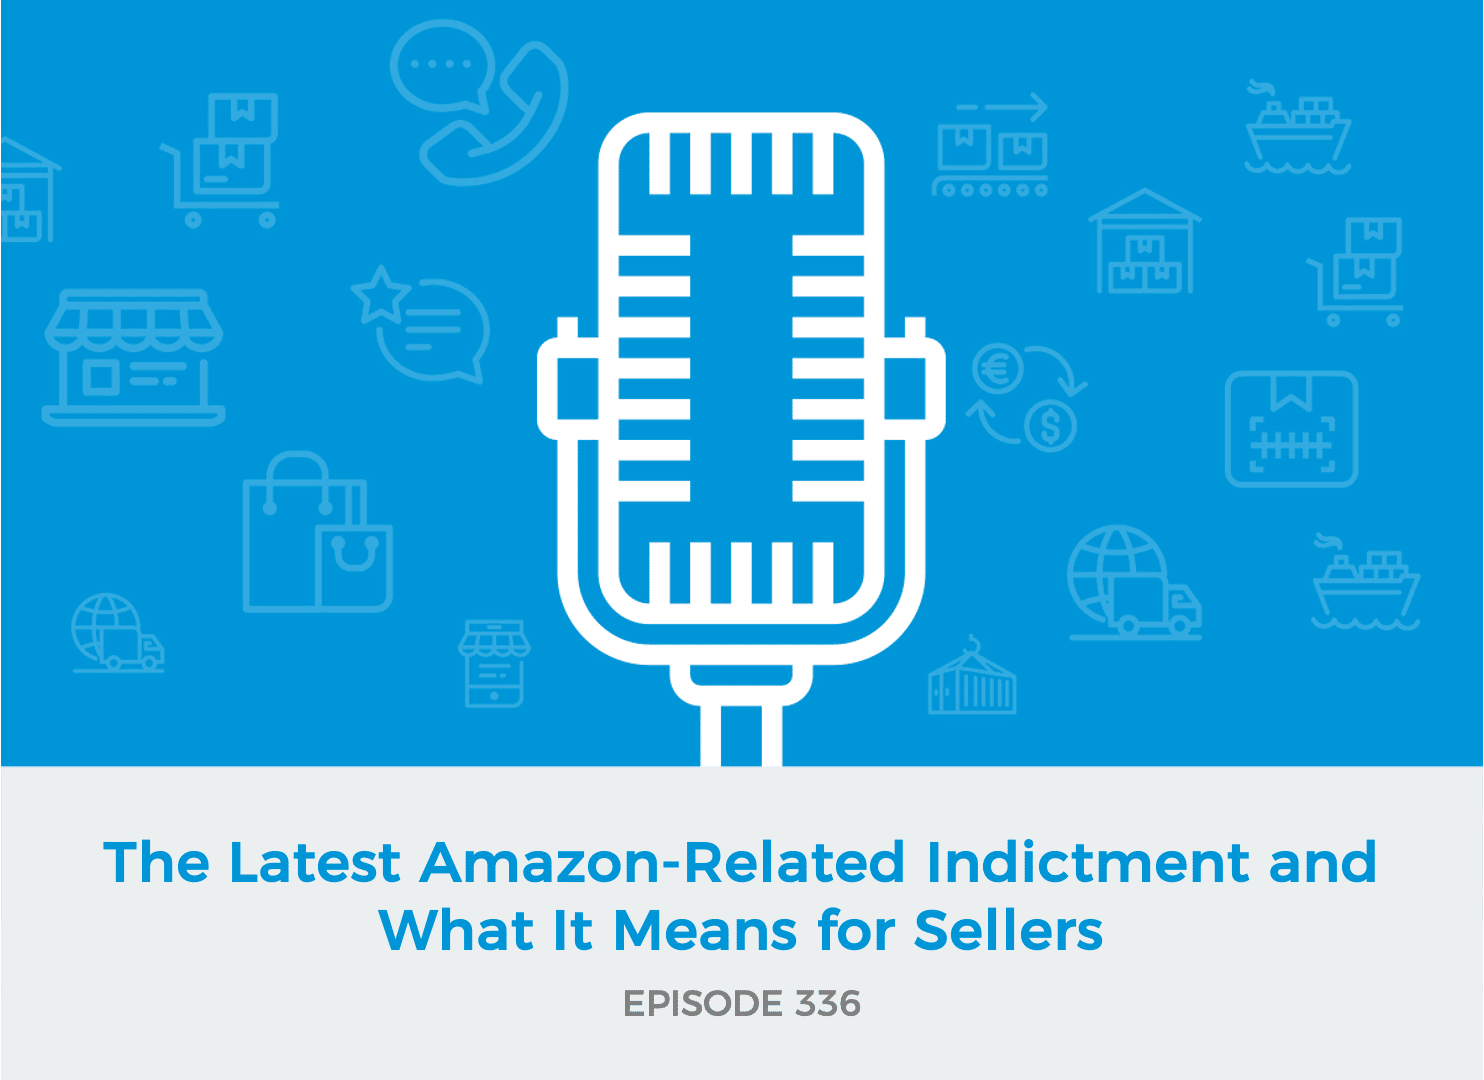 E336 - The Latest Amazon-Related Indictment and What It Means for Sellers